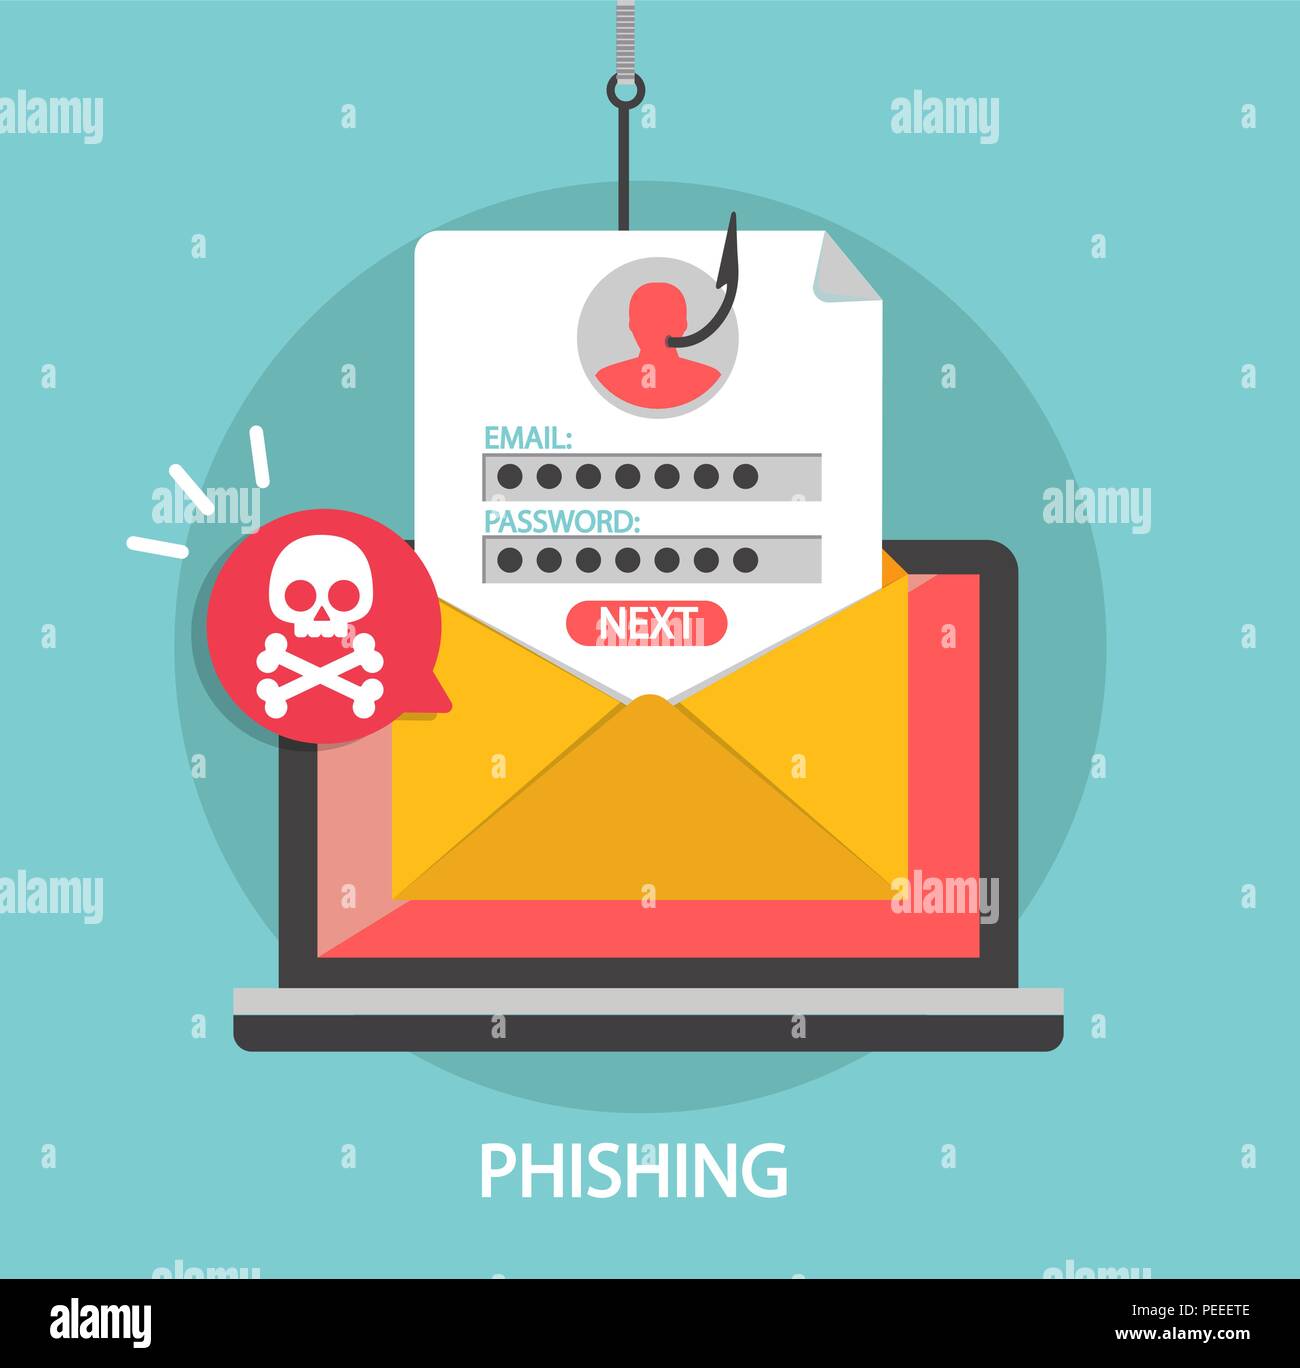 Phishing login and password on fishing hook in email envelope. Concept of Internet and network security. Hacking online scam on laptop. Flat style vector illustration. Stock Vector